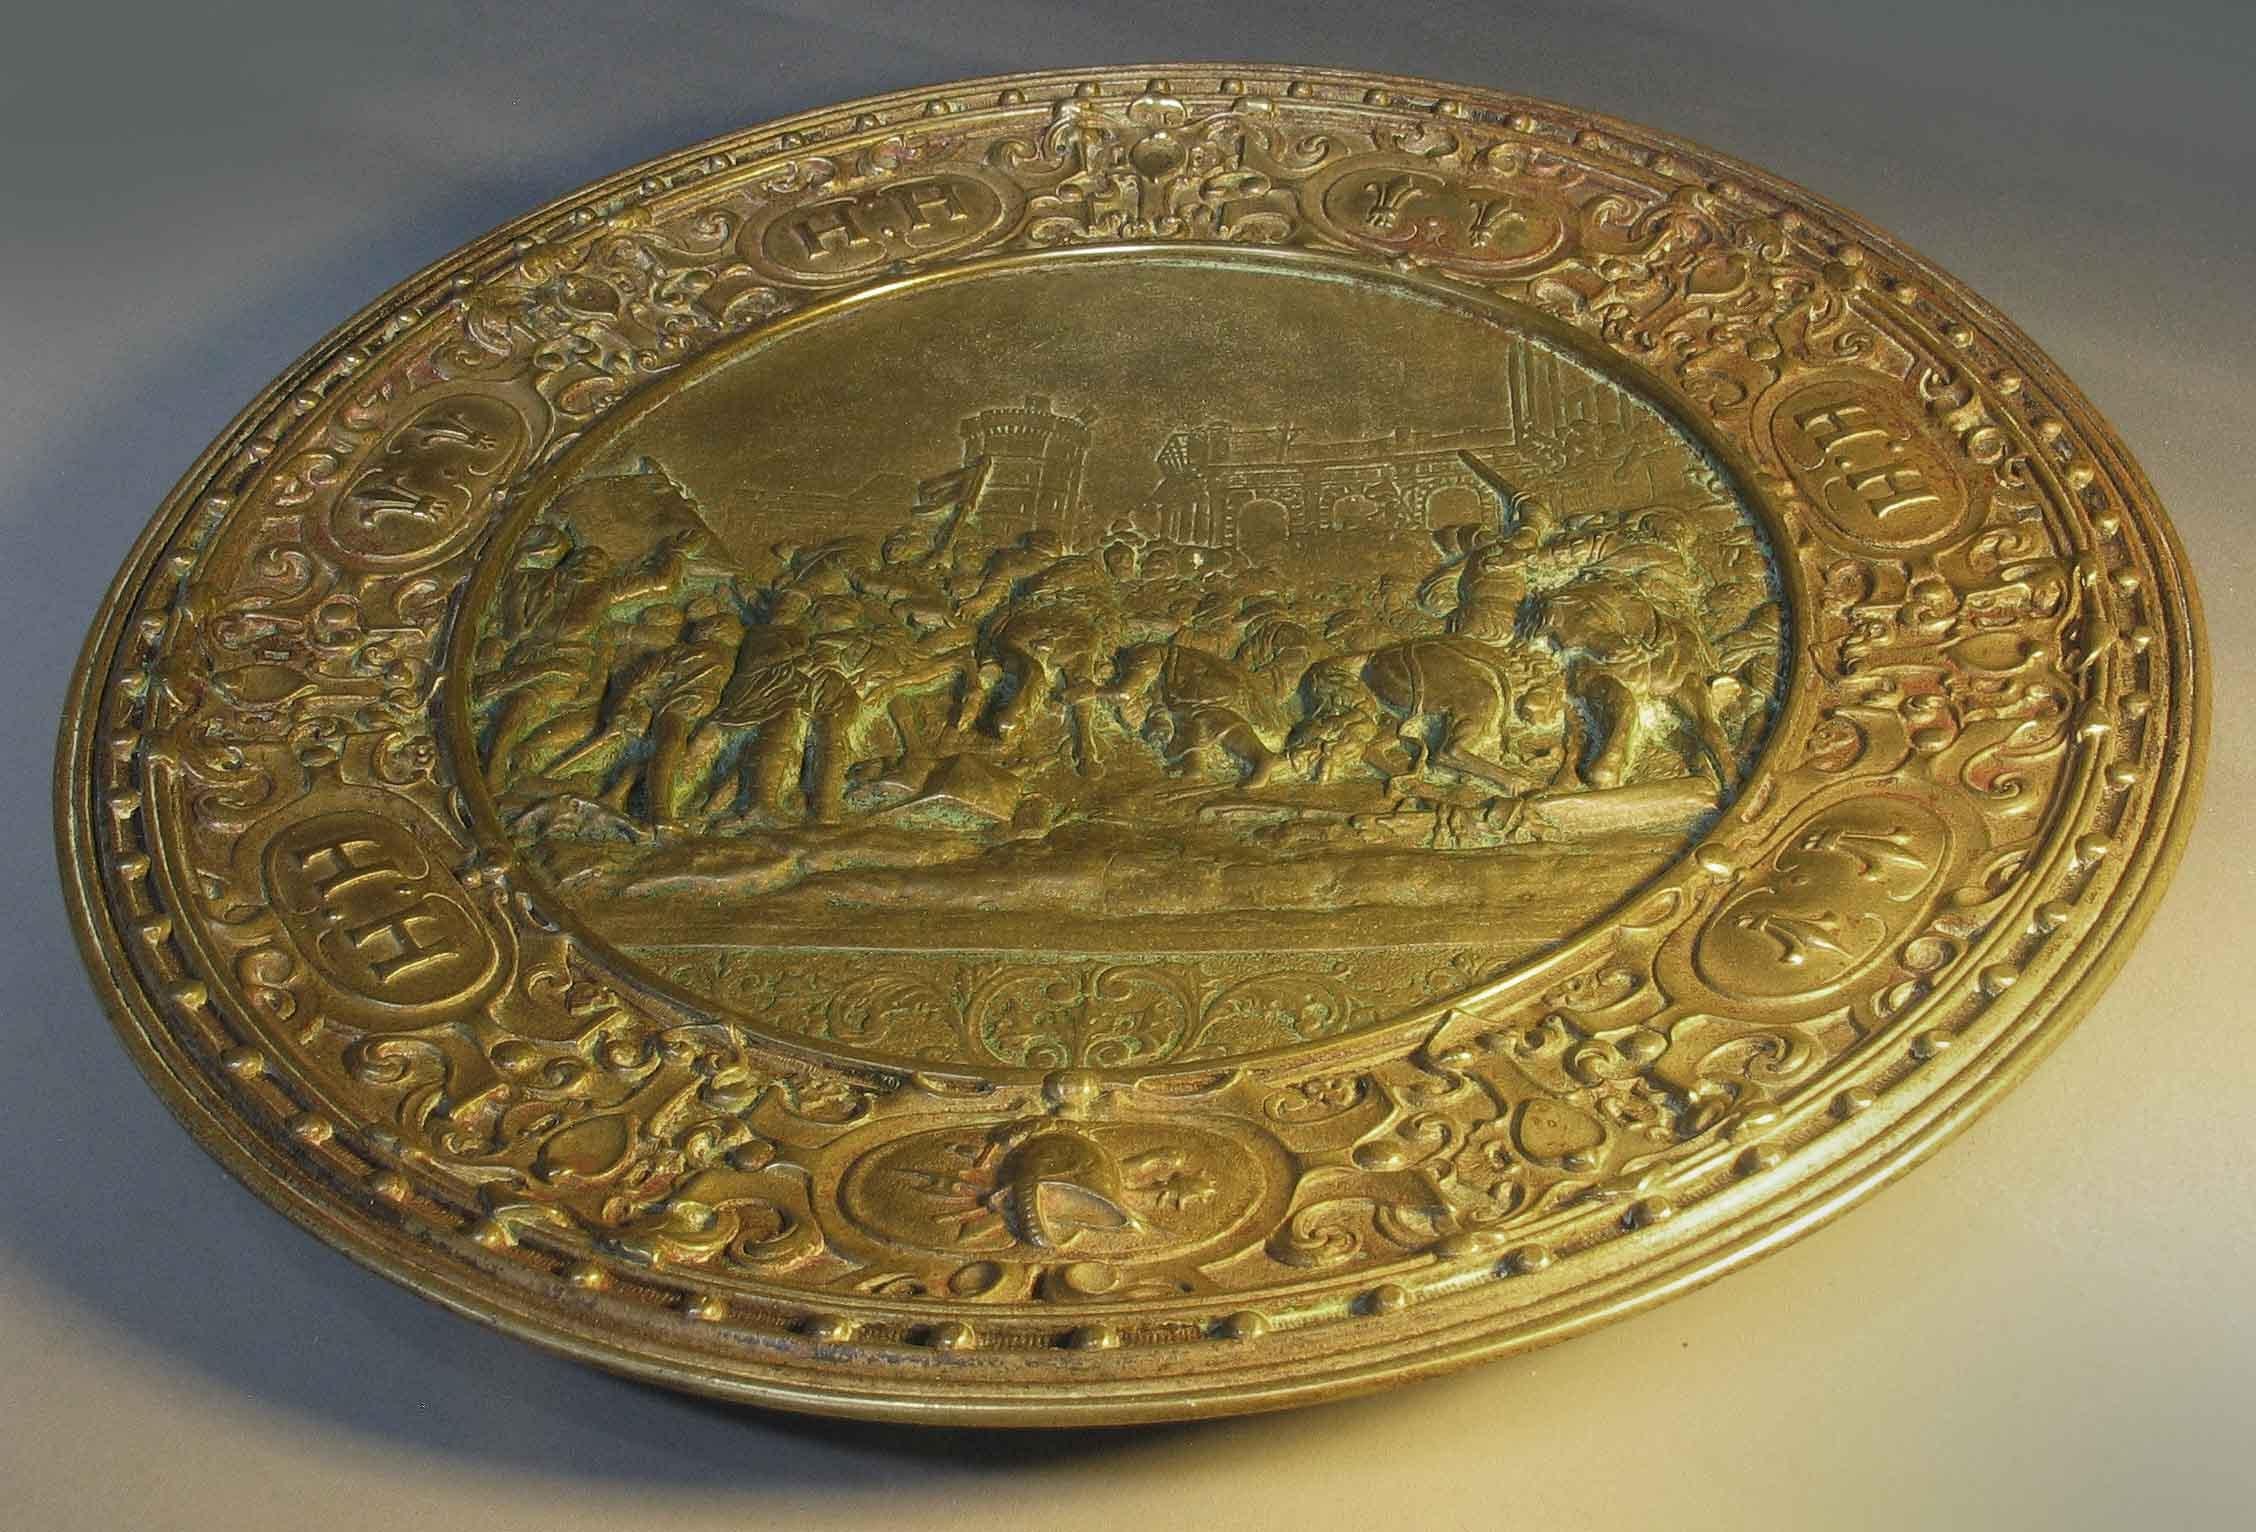 German Bronze Historicism Charger Depicting Entry of Henry IV into Paris in 1594 For Sale 2